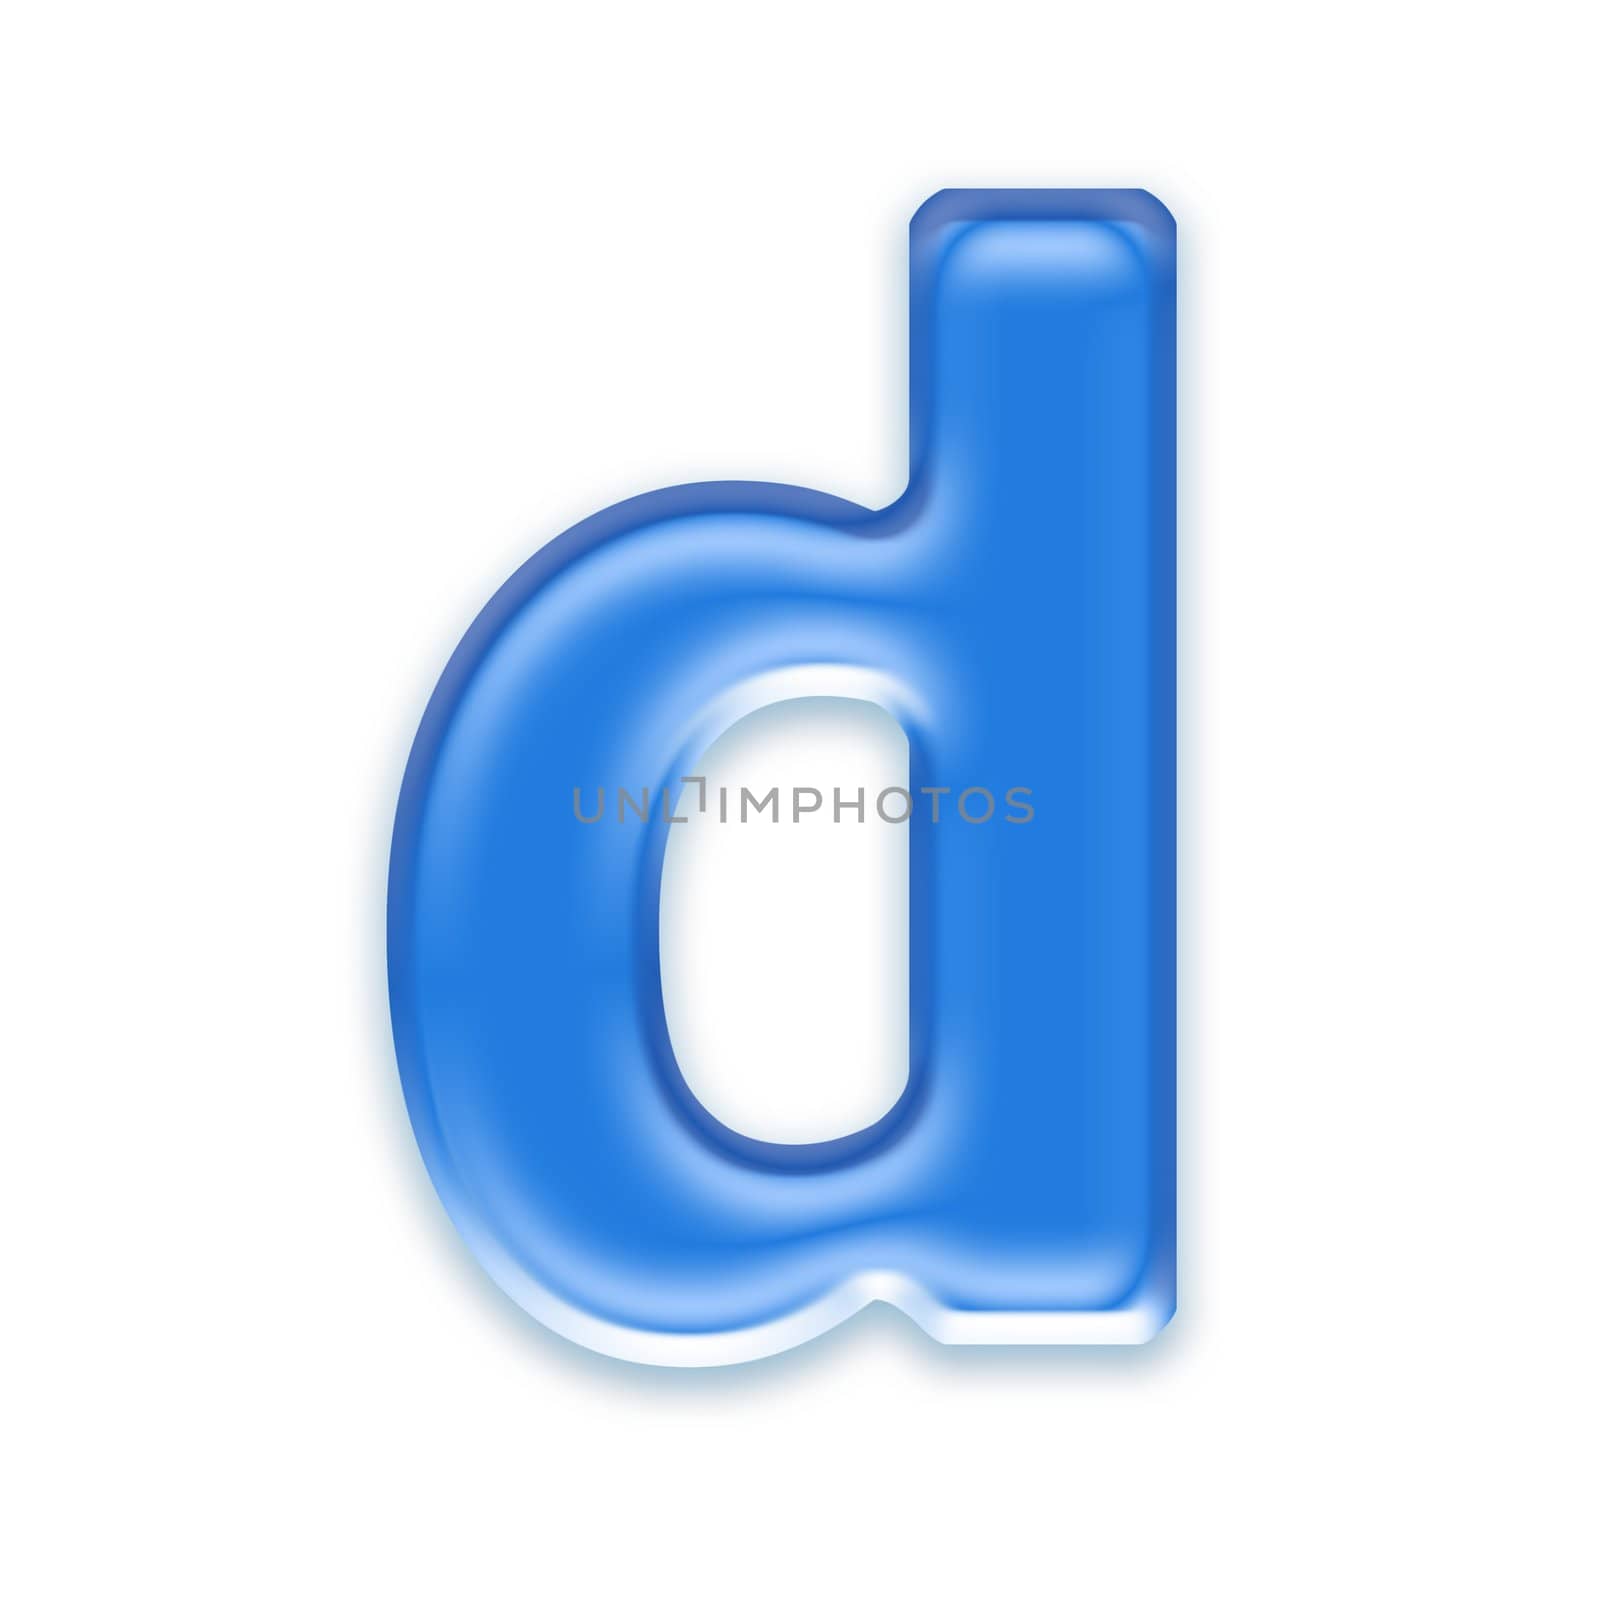 Aqua letter isolated on white background  - d